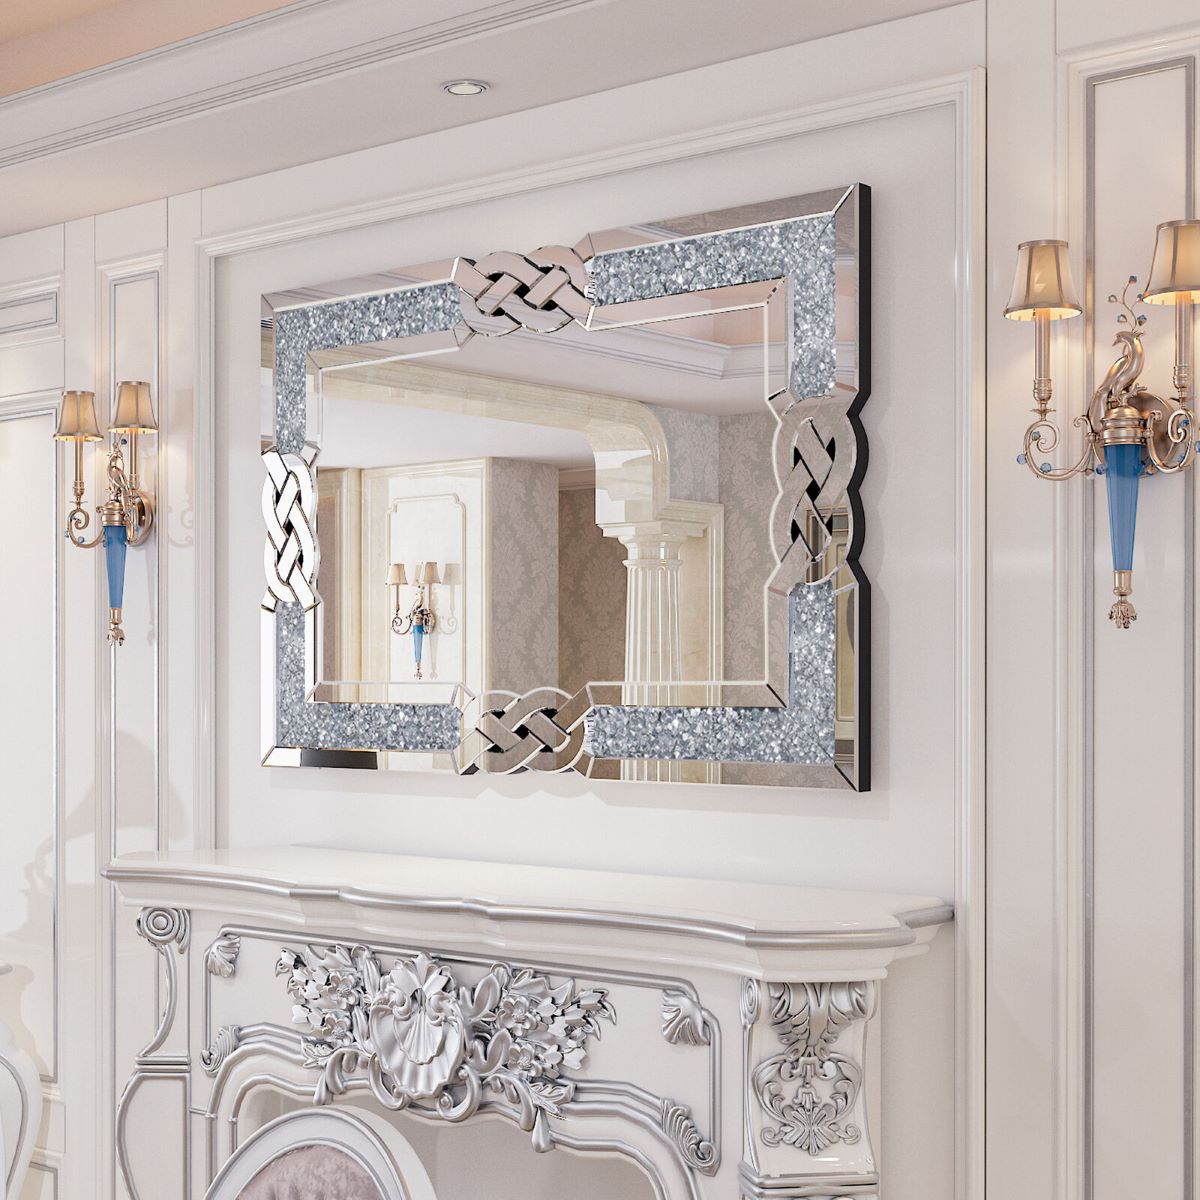 Big mirrors for room